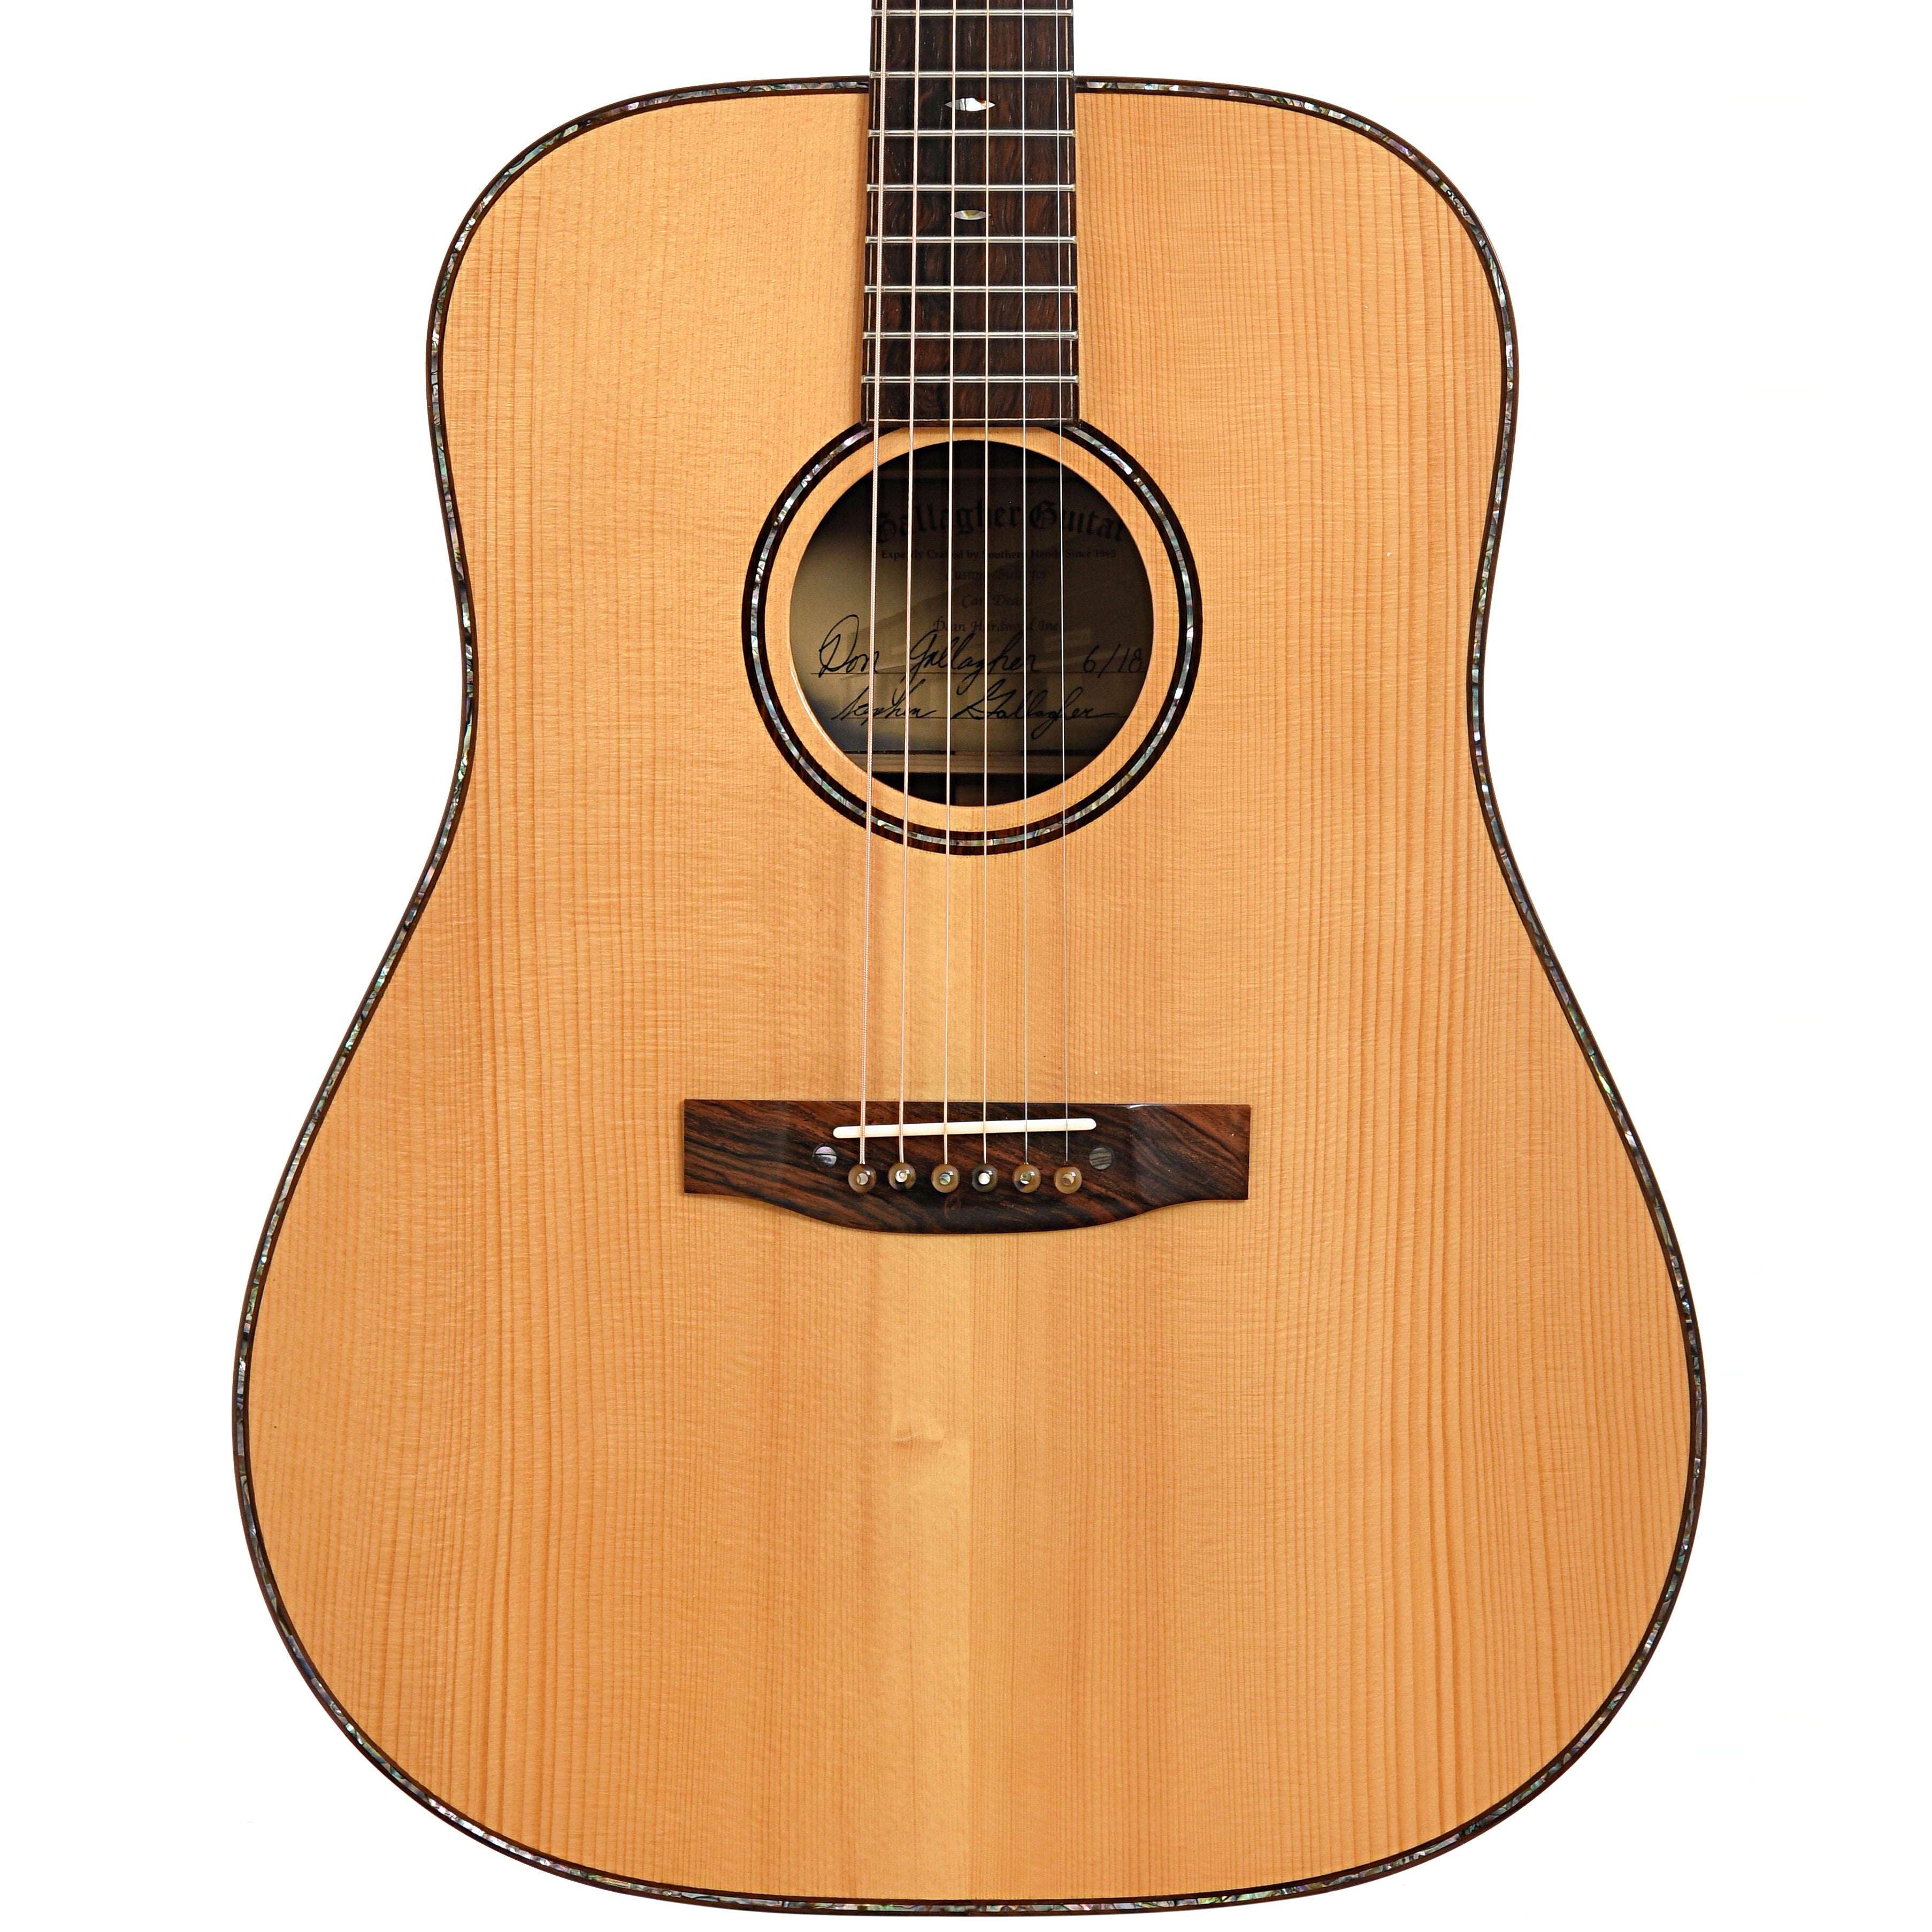 Gallagher Custom 72 Special Brazilian Rosewood Acoustic Guitar (2014)